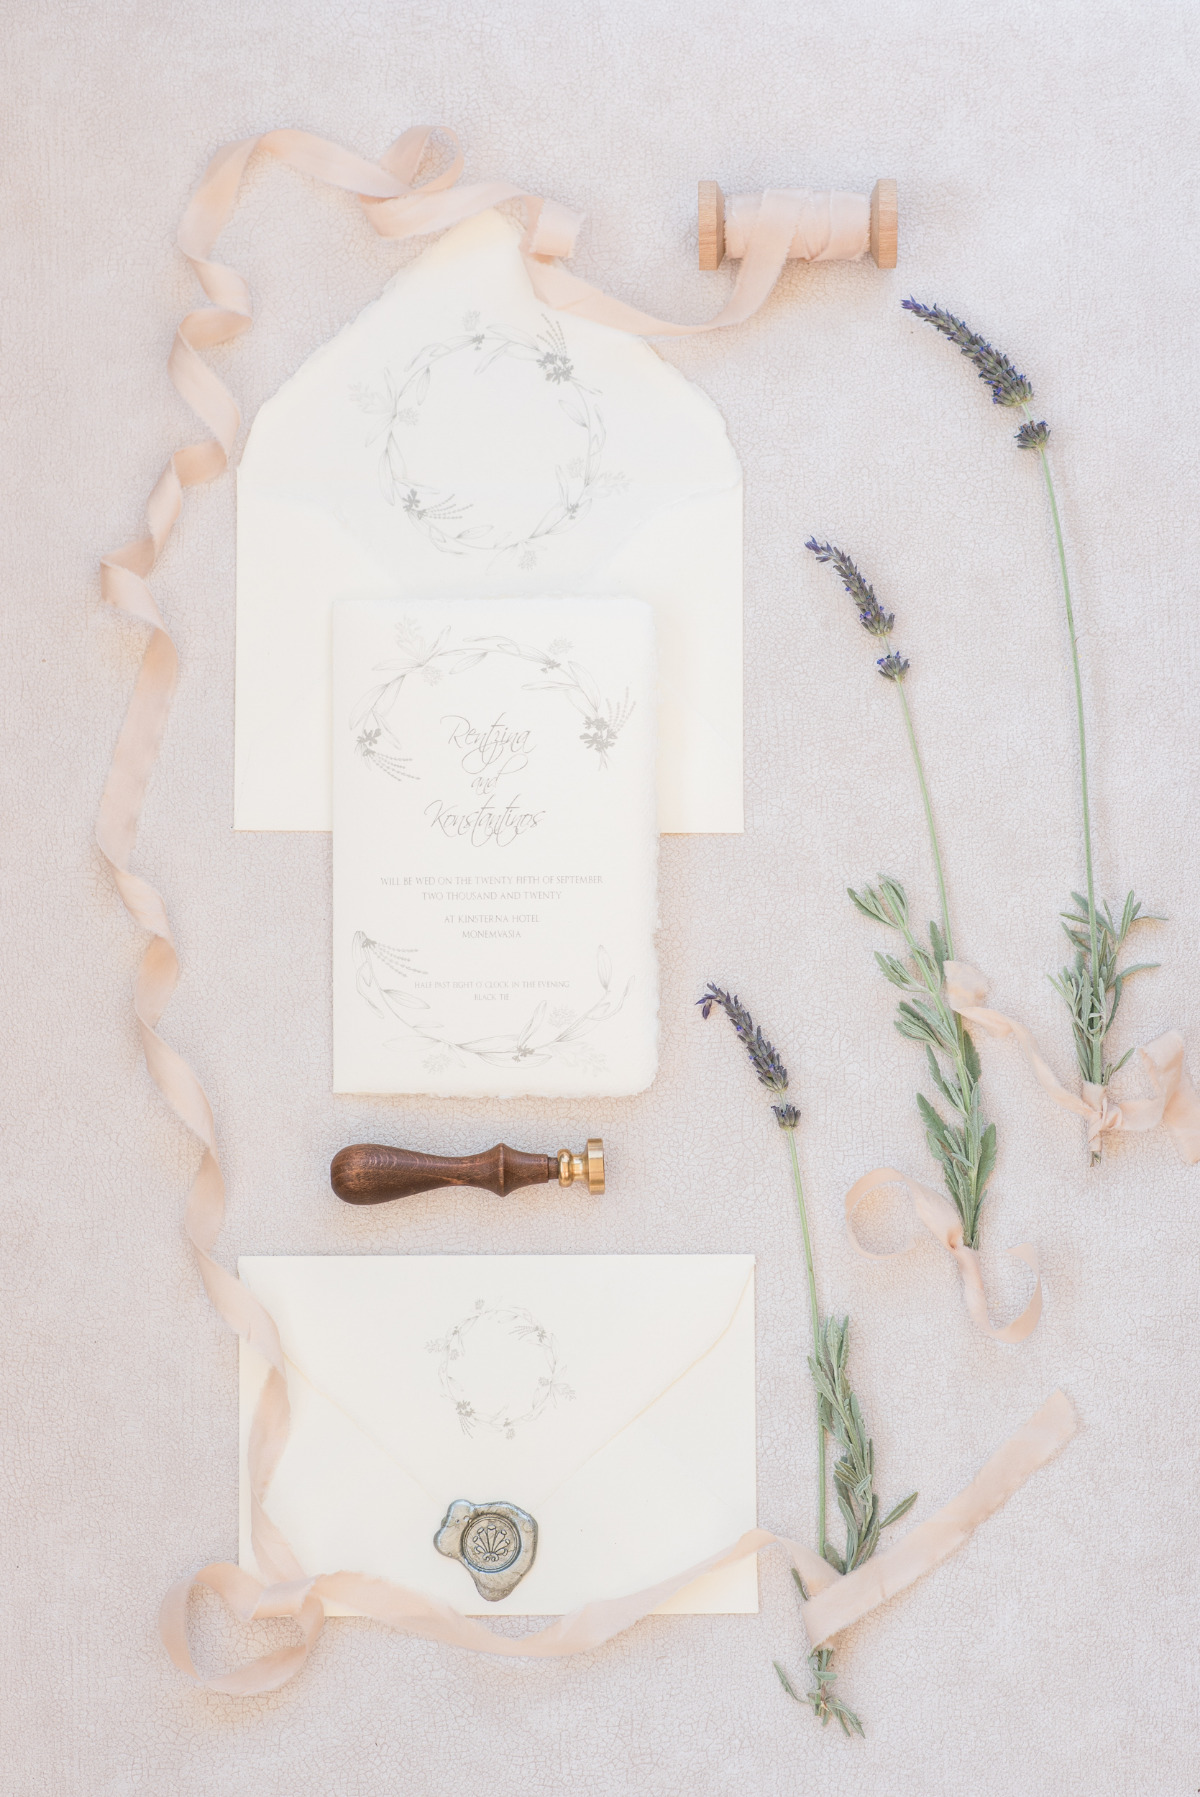 Micro Wedding Inspiration In A Greek Castle That's Out Of This World